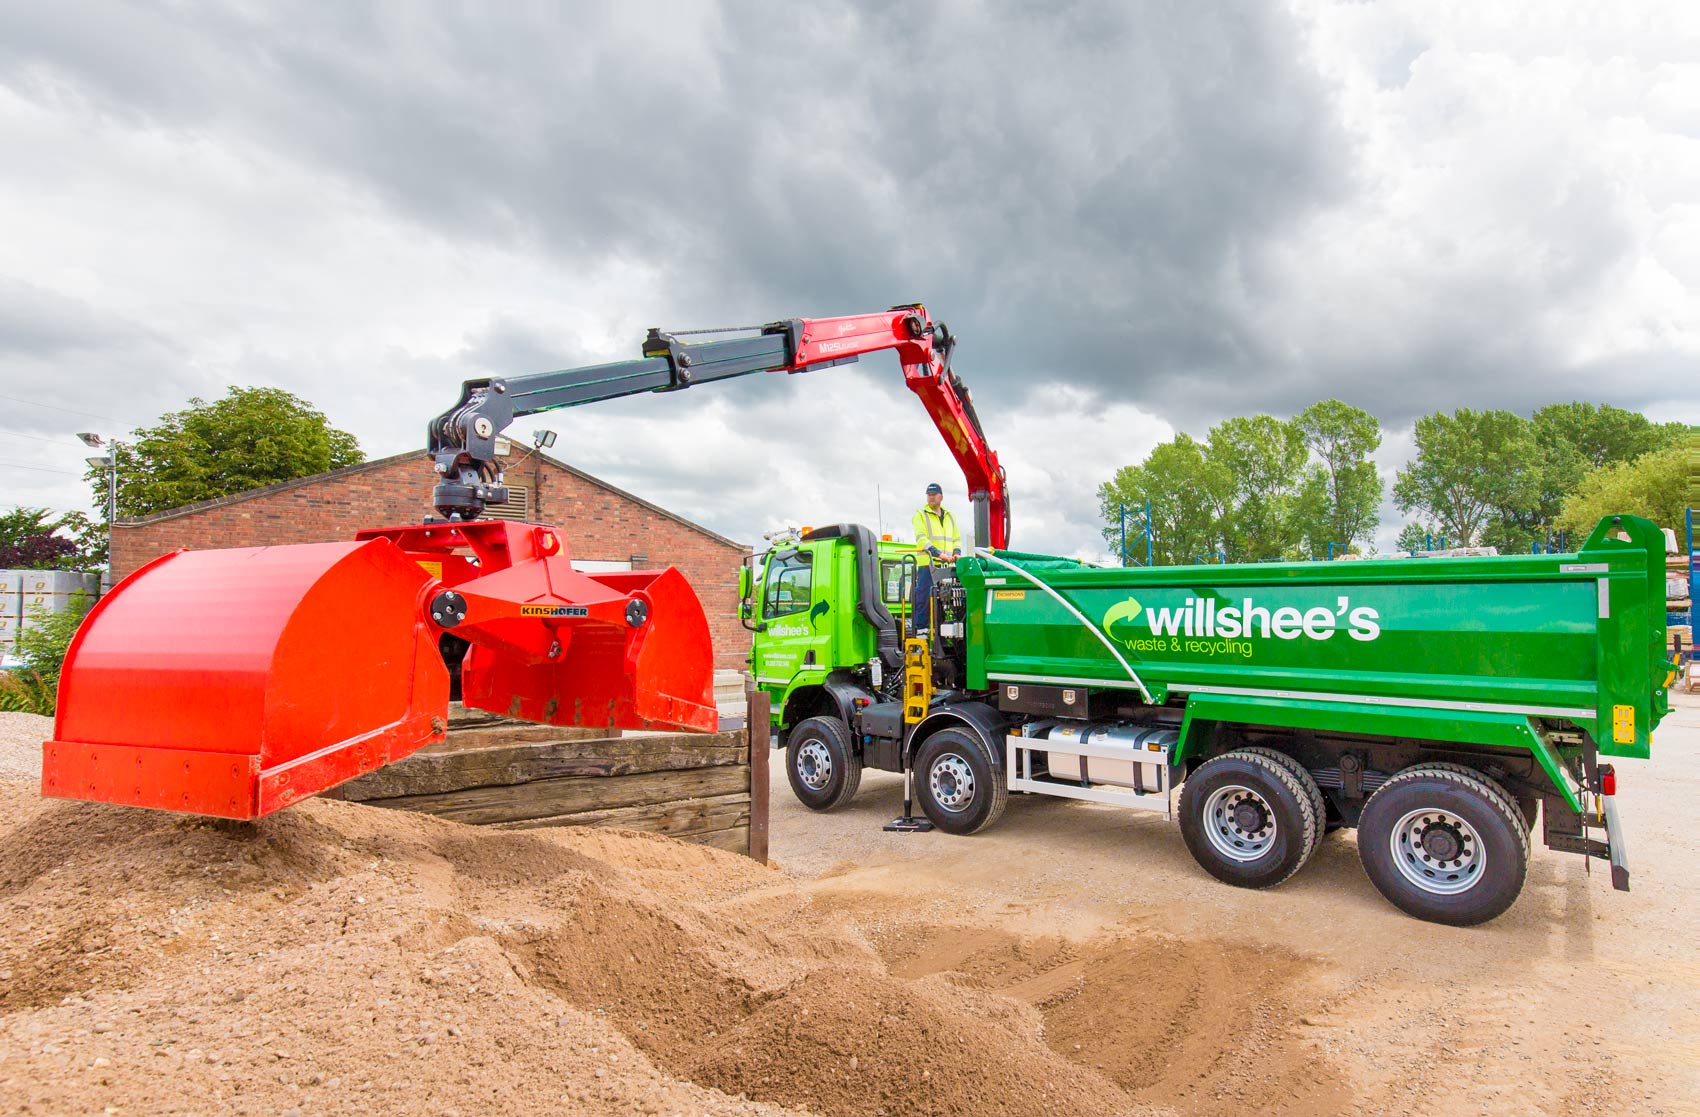 Construction Photography of a green grabber truck wit ha bright red bucket about to grab a load of gravel